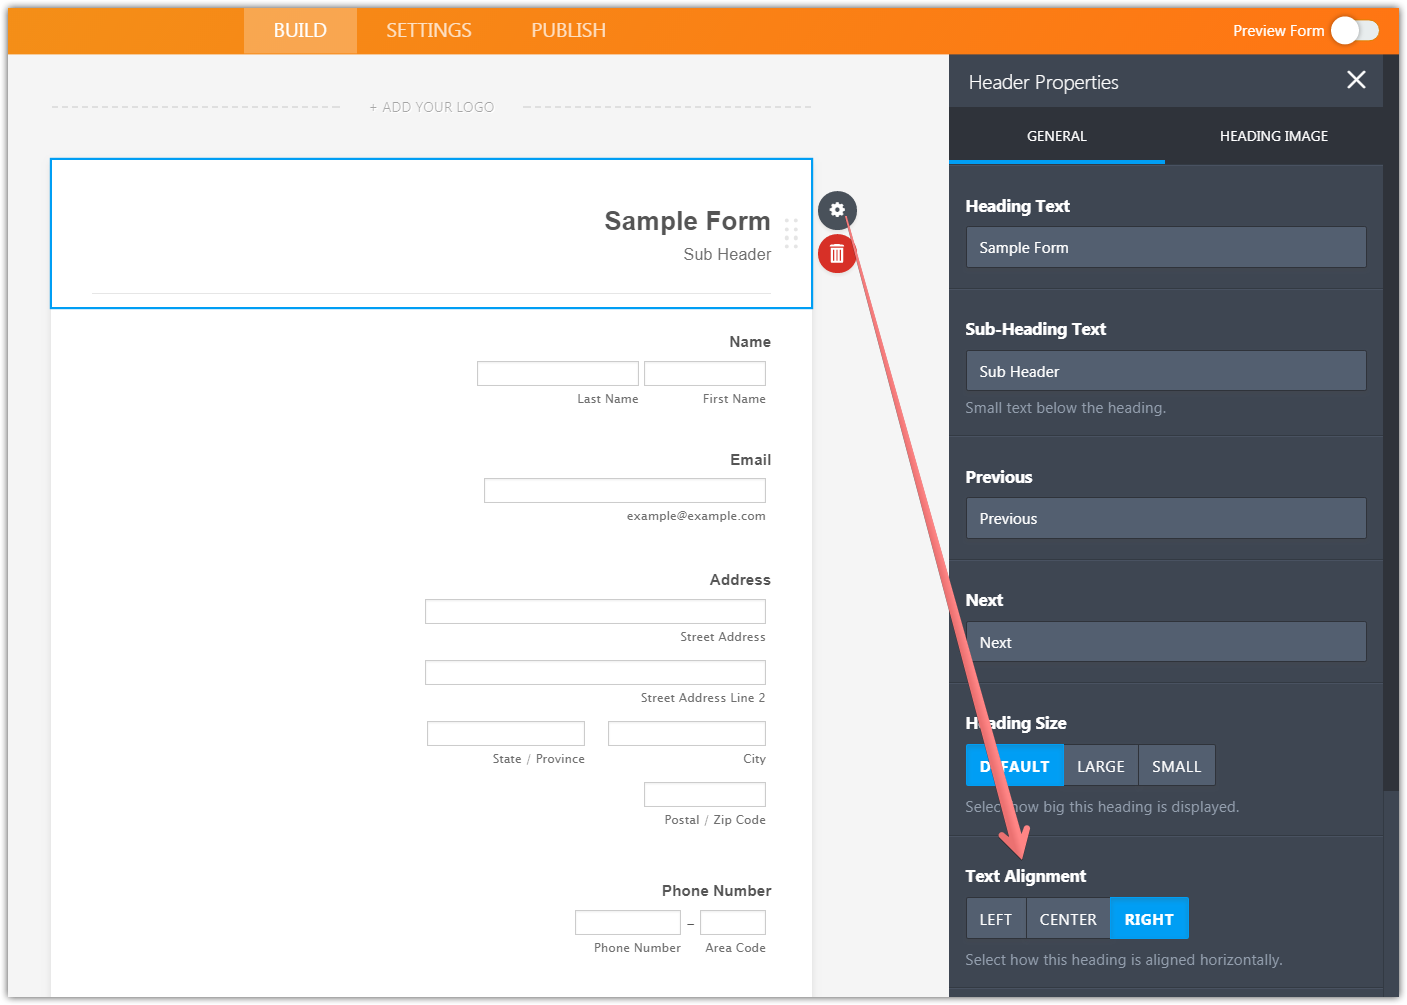 Request to add Right To Left alignment option on forms Image 2 Screenshot 41